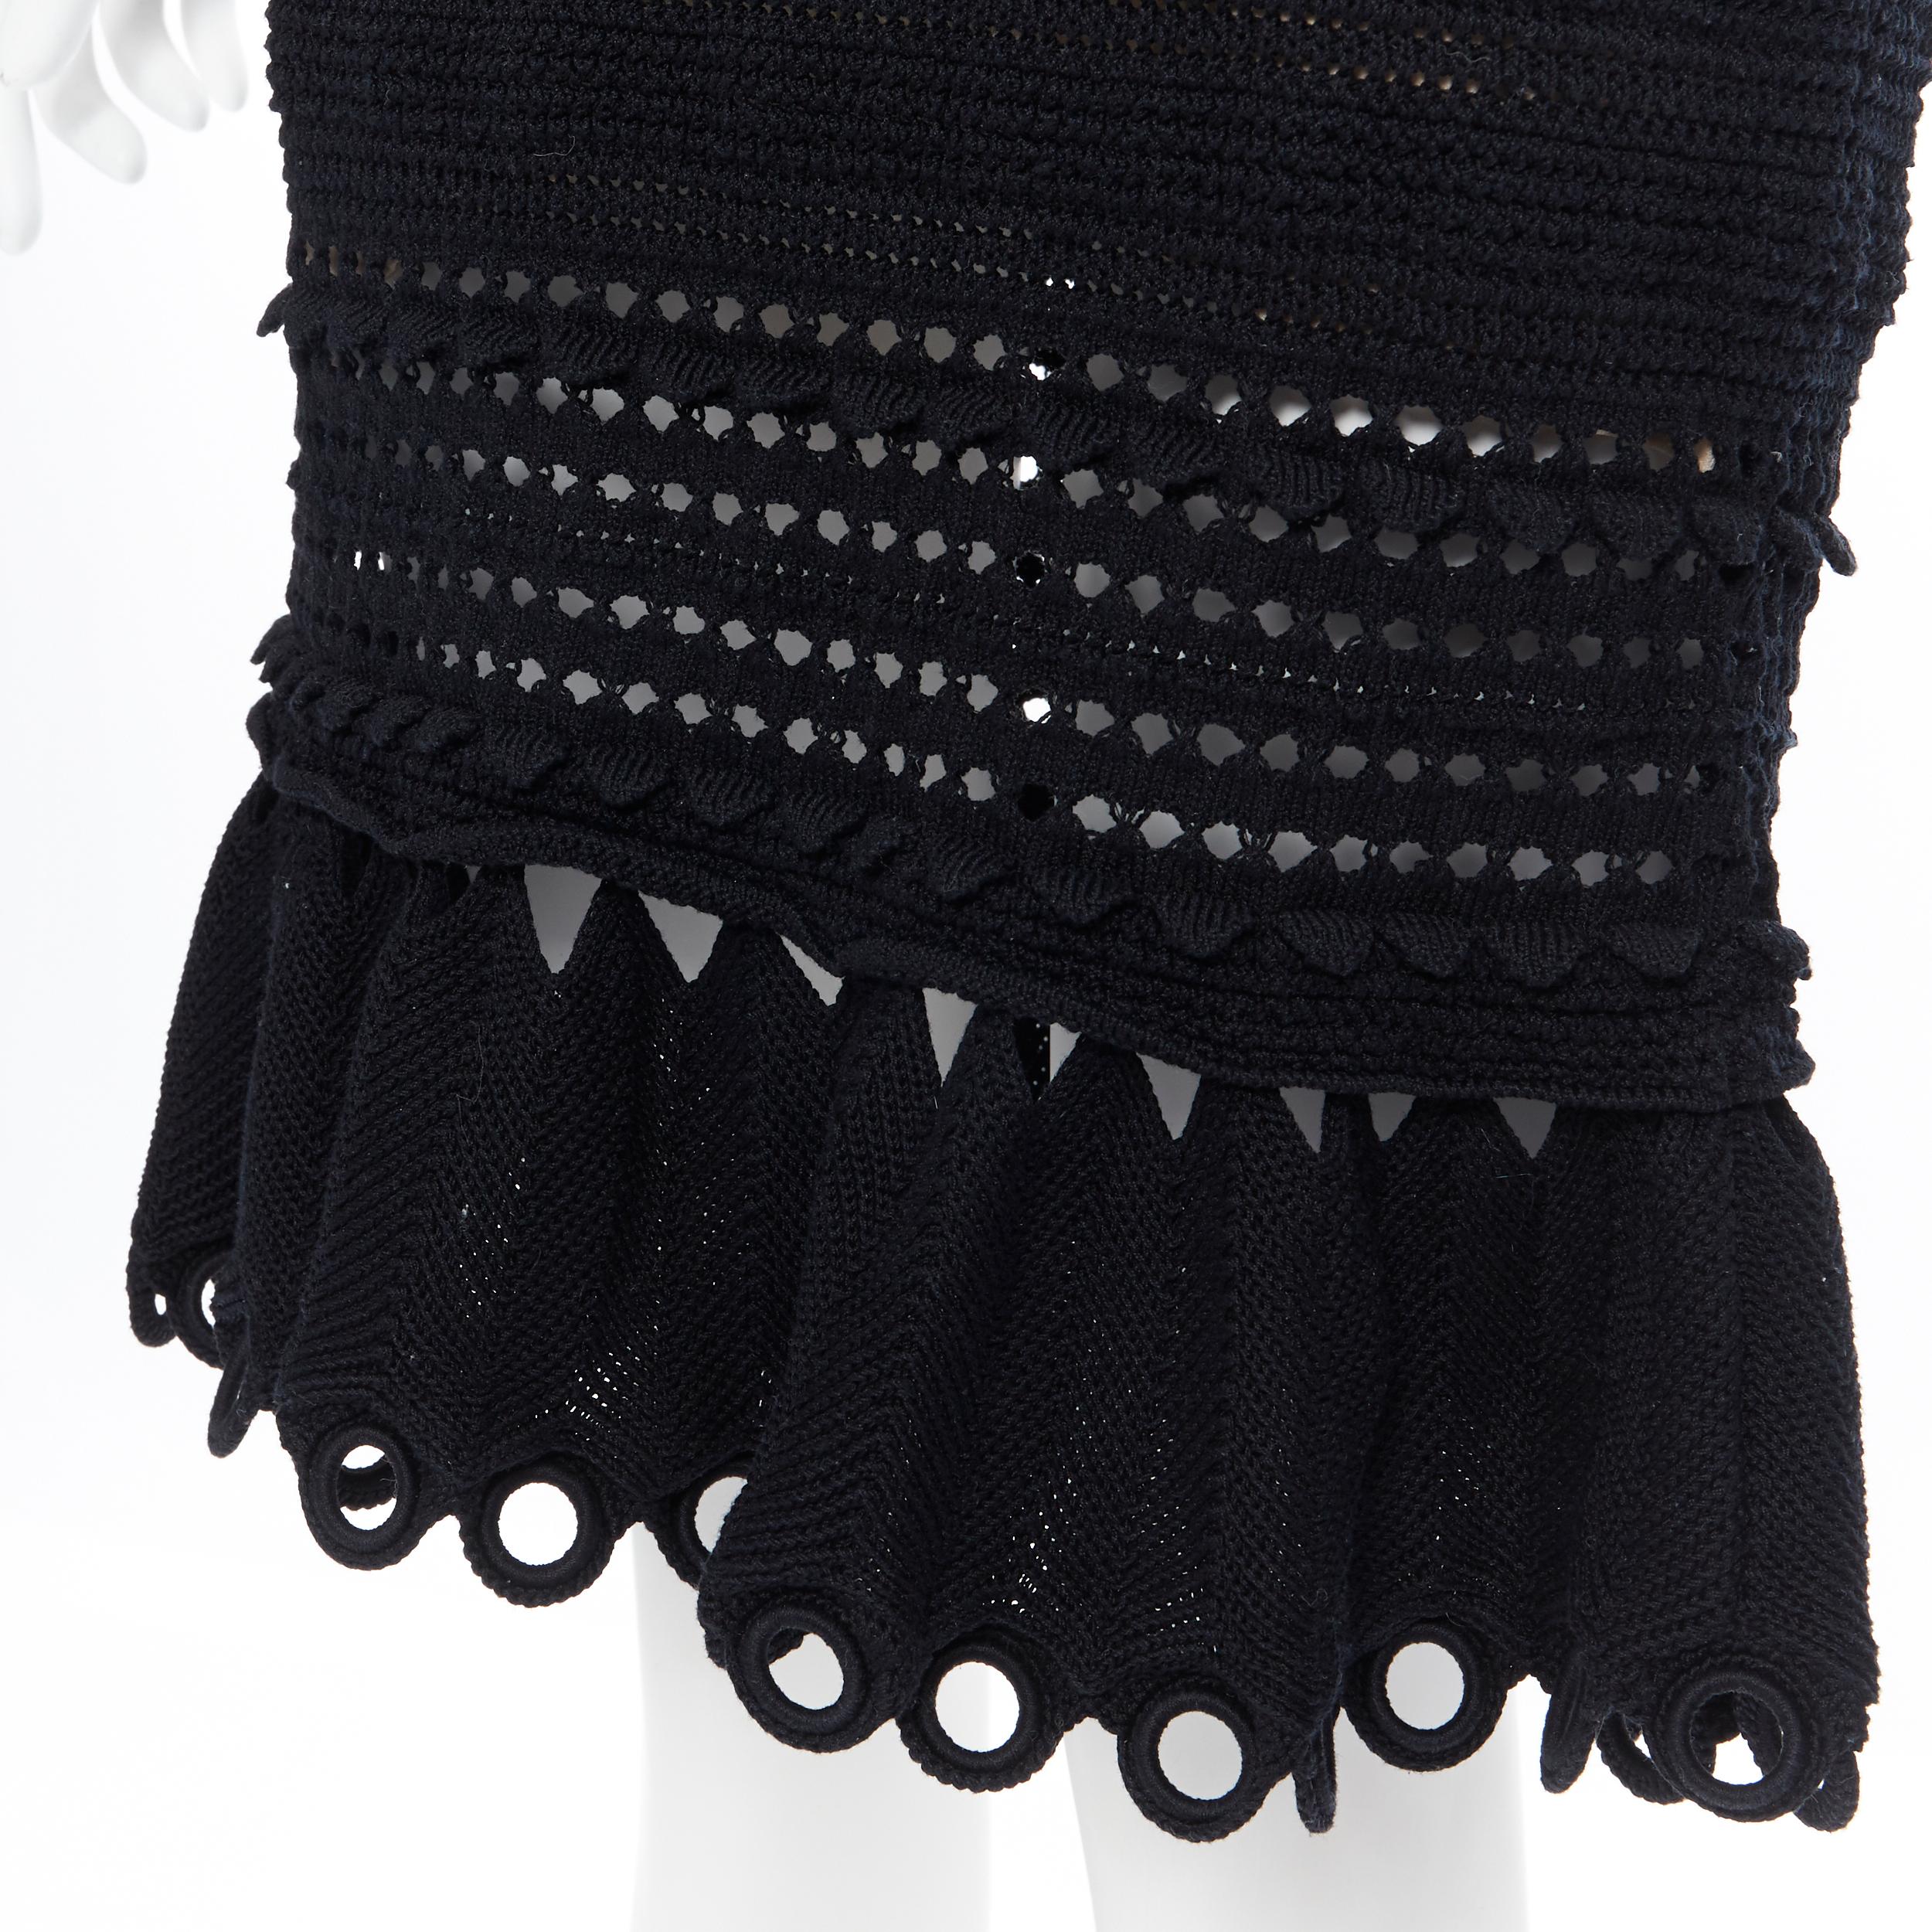 ALEXANDER MCQUEEN black crochet knit eyelet flared hem midi cocktail dress M
Brand: Alexander McQueen
Model Name / Style: Knit dress
Material: Cotton blend
Color: Black
Pattern: Solid
Extra Detail: Nude lace lining. Sleeveless. Round neck